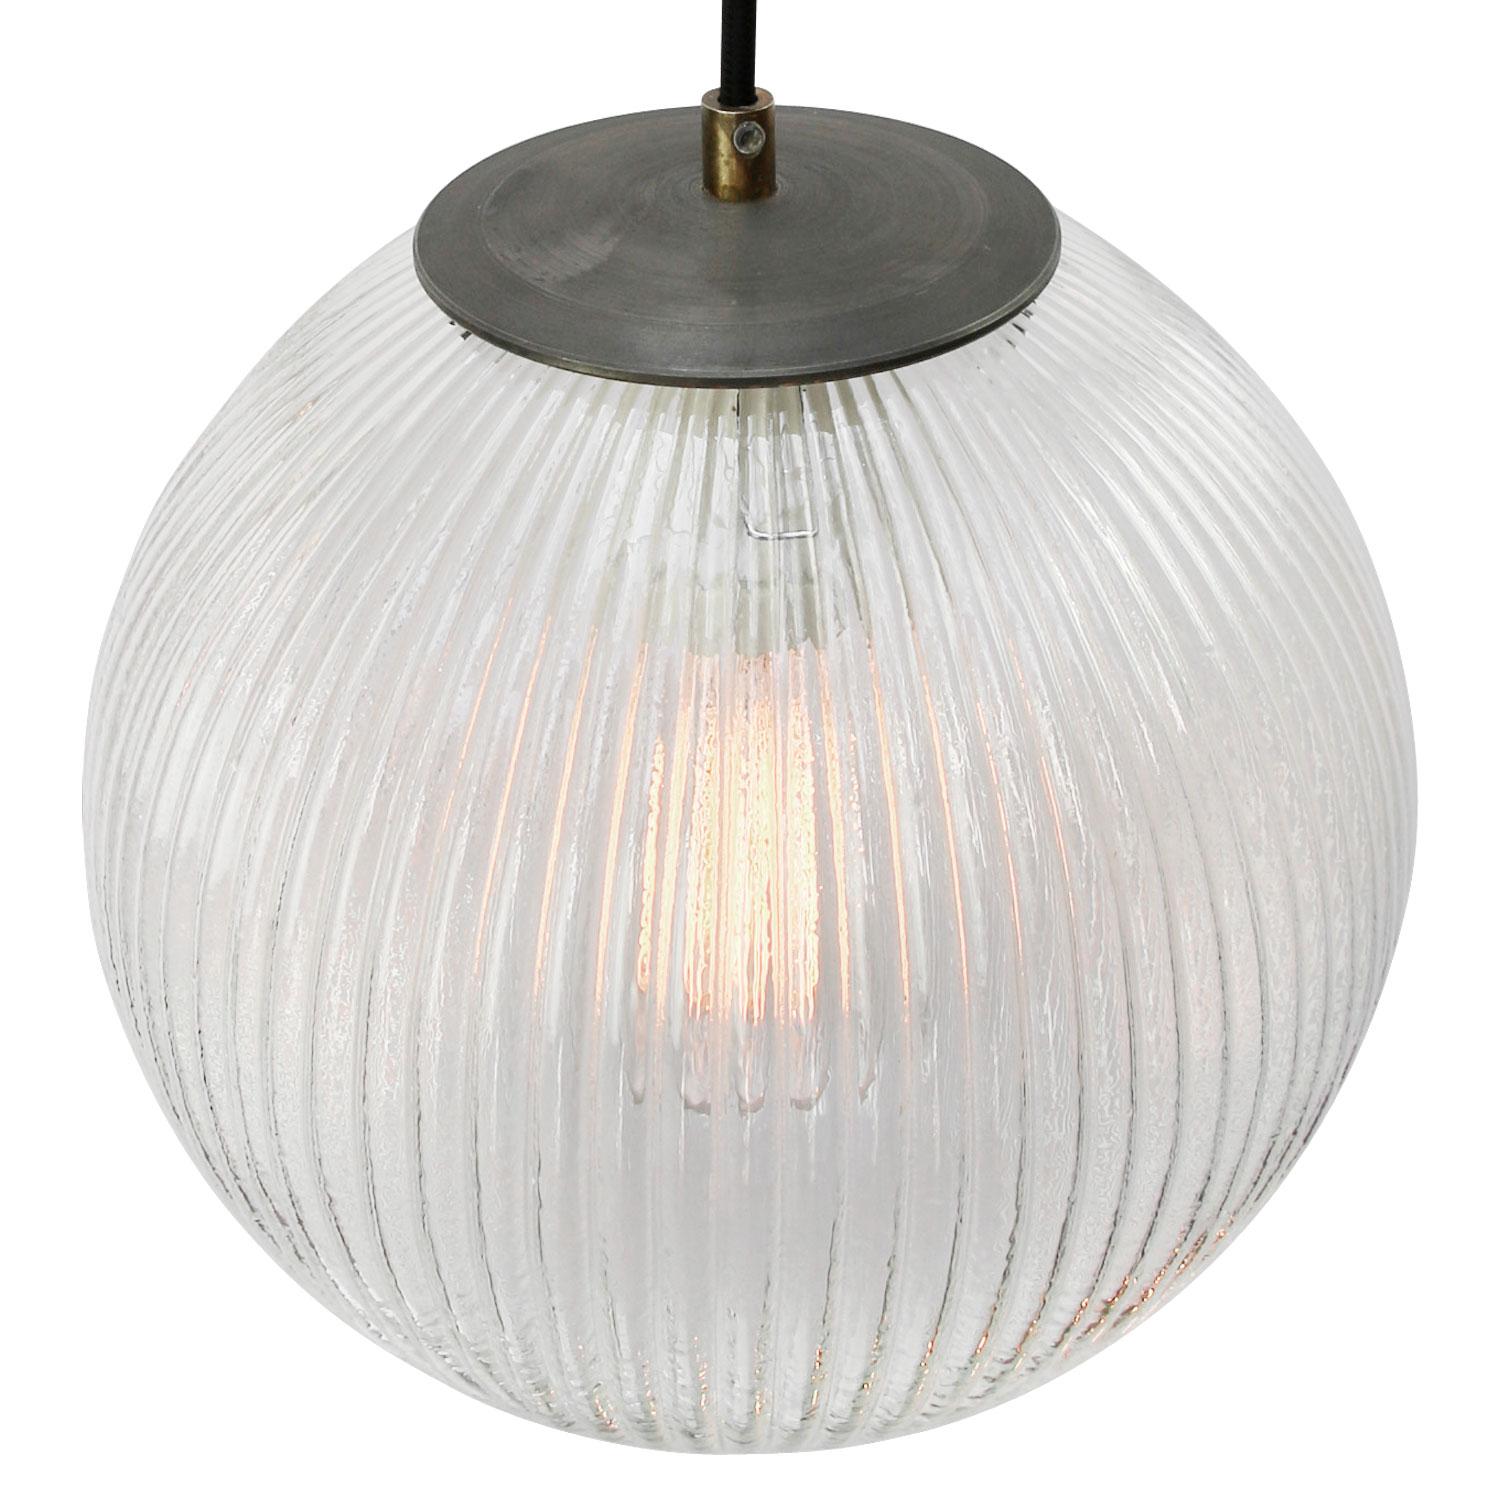 Clear texture glass pendant.
2 meter black wire

Weight: 2.50 kg / 5.5 lb

Priced per individual item. All lamps have been made suitable by international standards for incandescent light bulbs, energy-efficient and LED bulbs. E26/E27 bulb